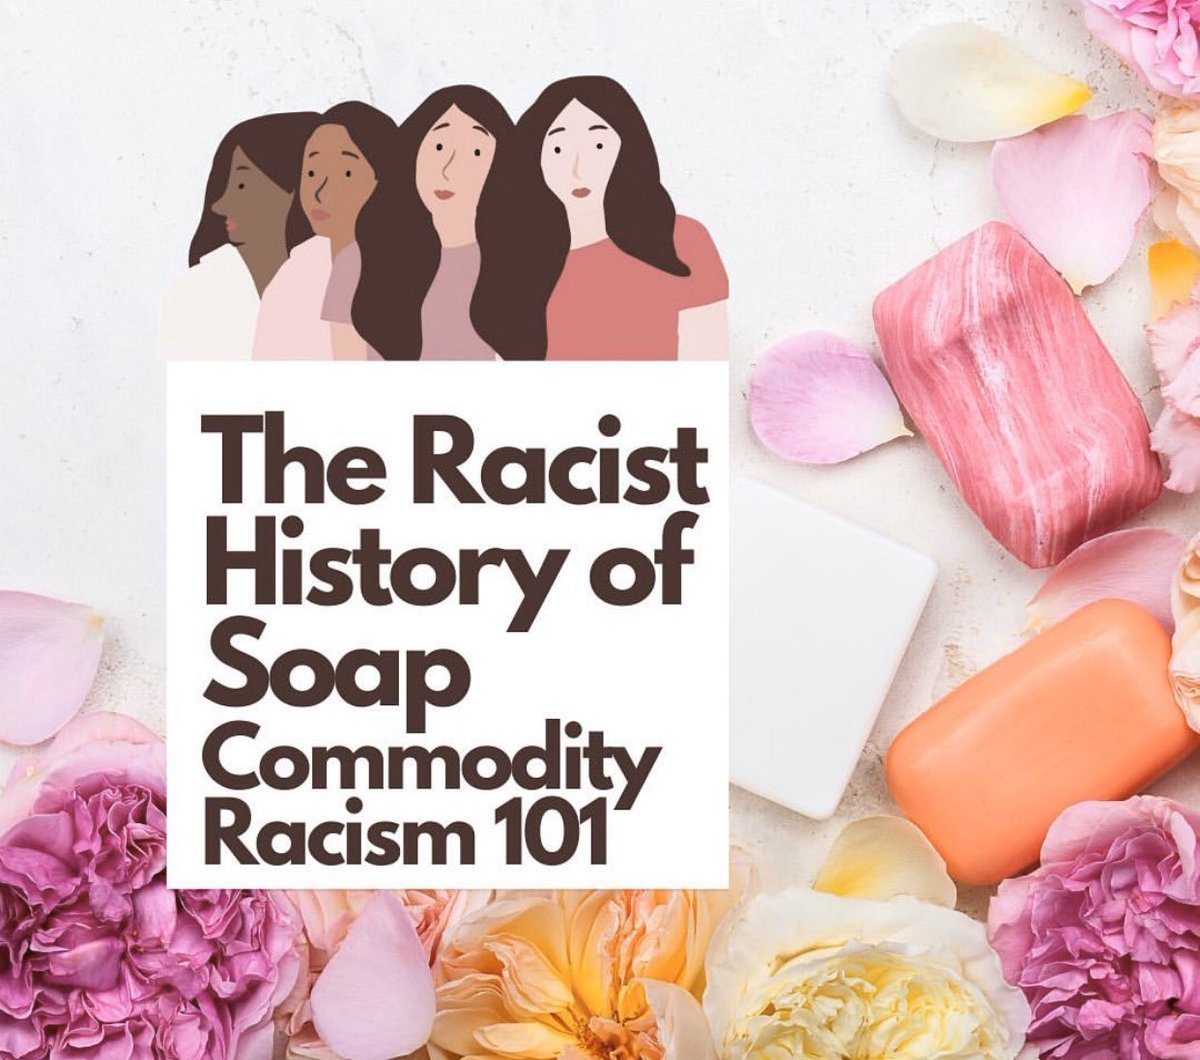 THINGS THAT ARE RACIST(part 6)• Soap • Toothpaste • White people speaking • White people not speaking